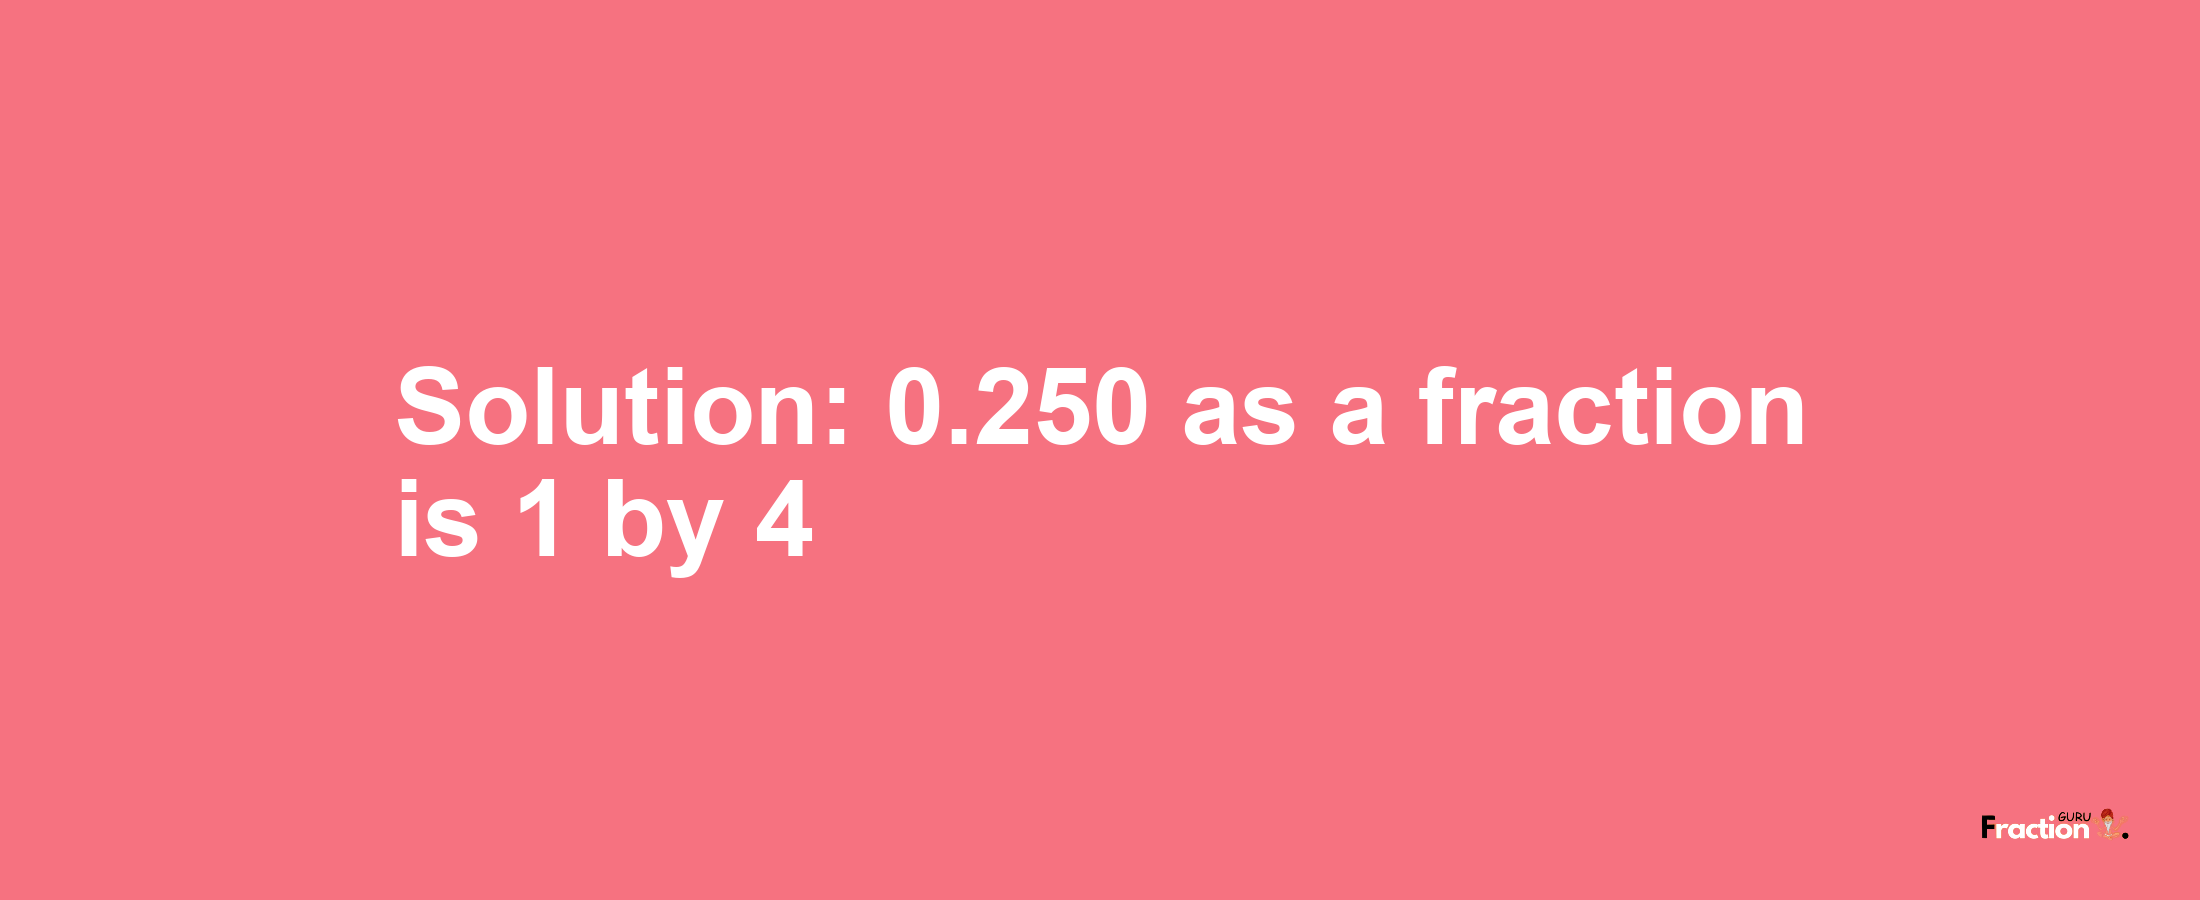 Solution:0.250 as a fraction is 1/4